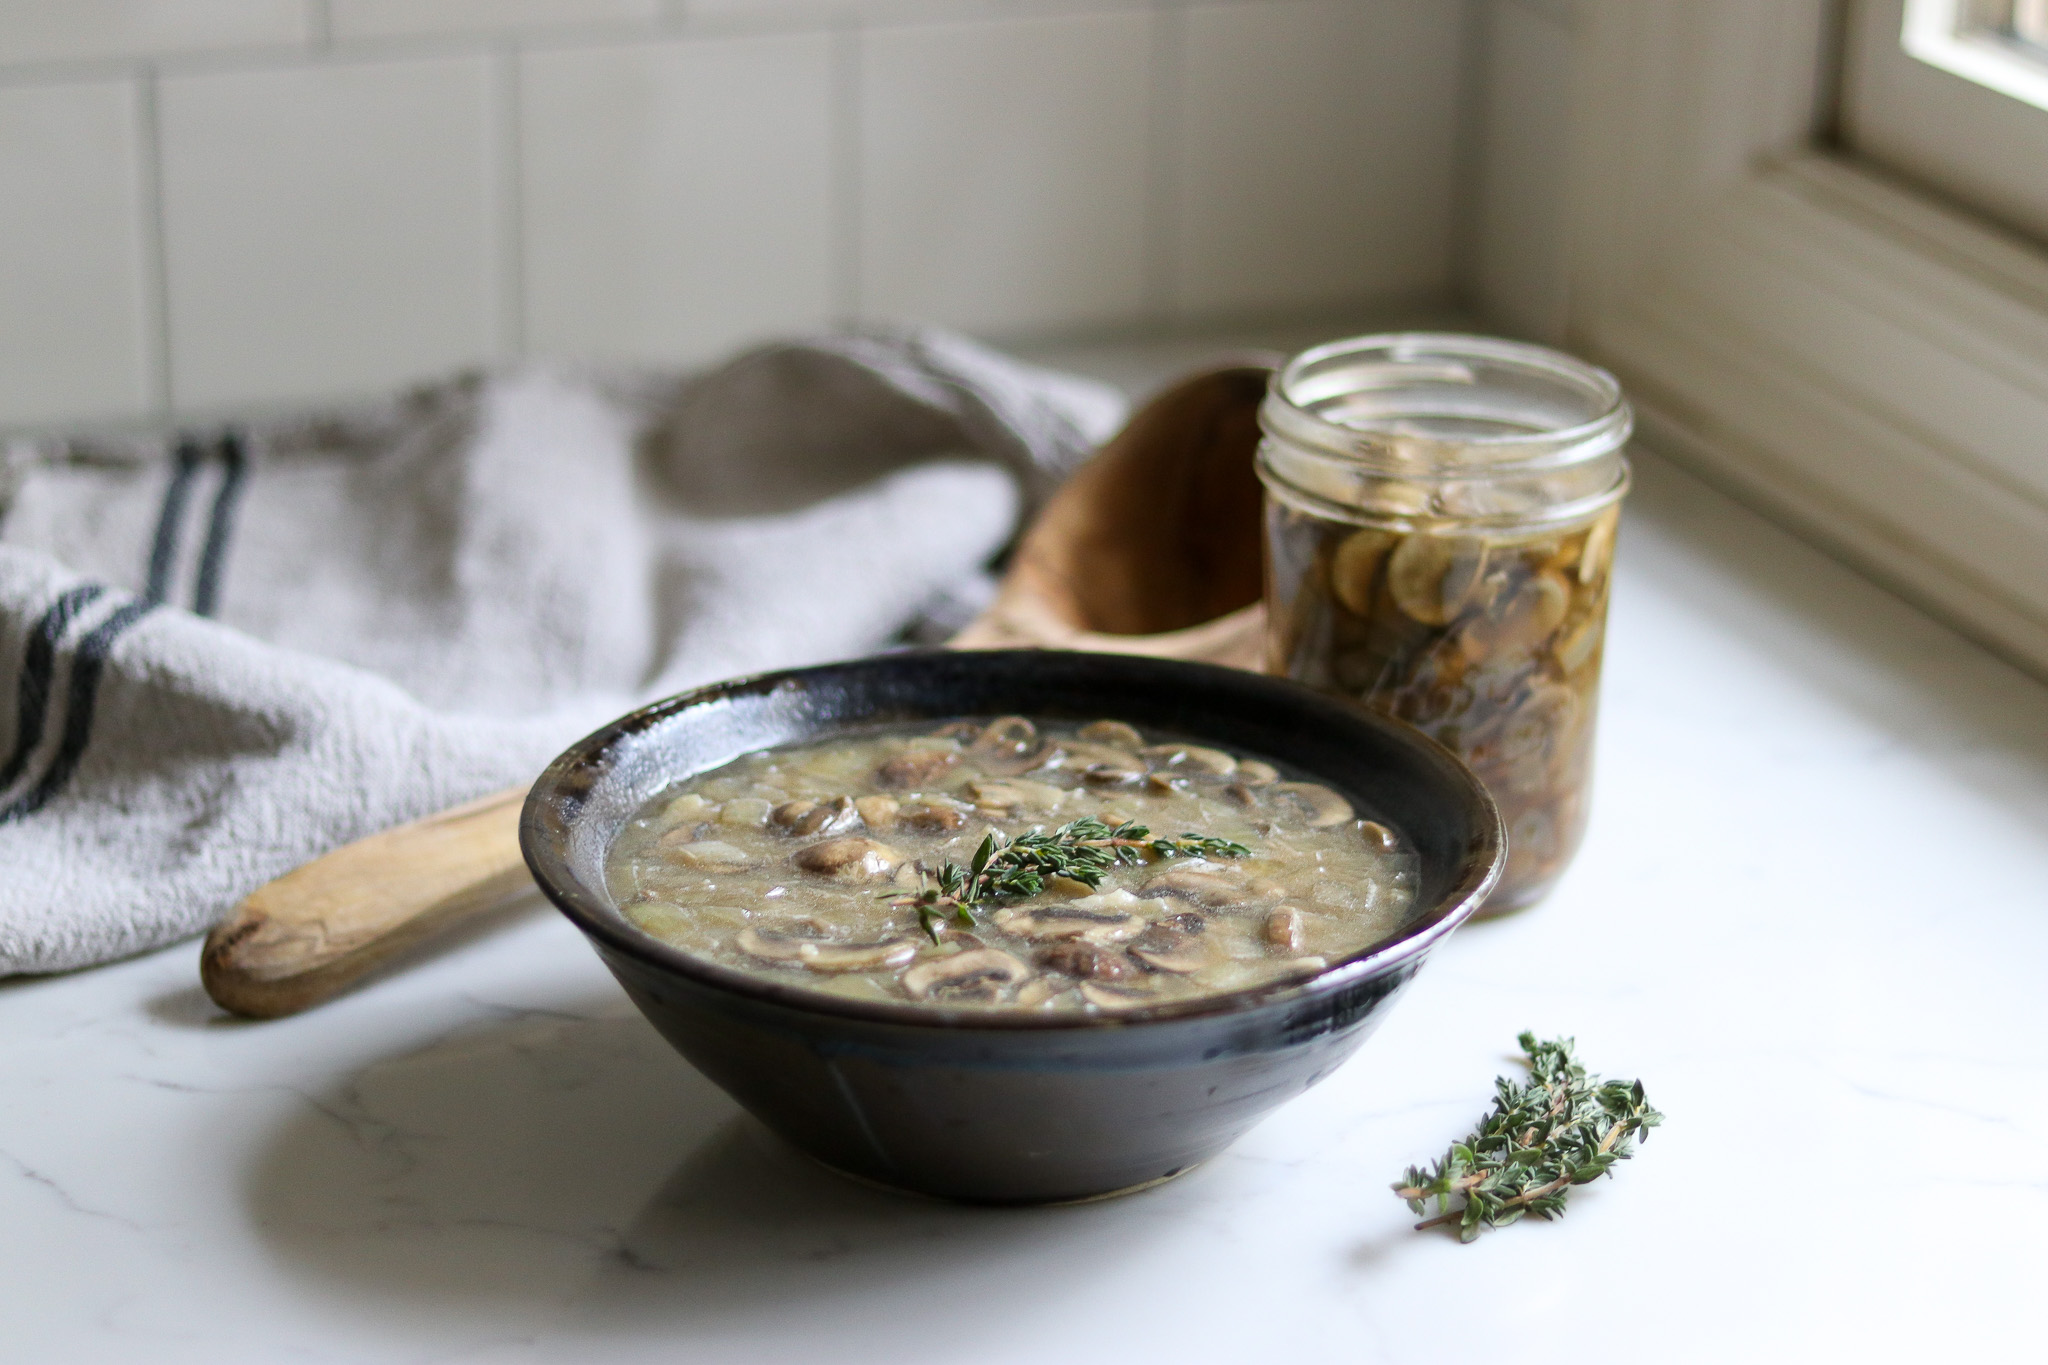 Prepared Cream of Mushroom Soup from Home Canned